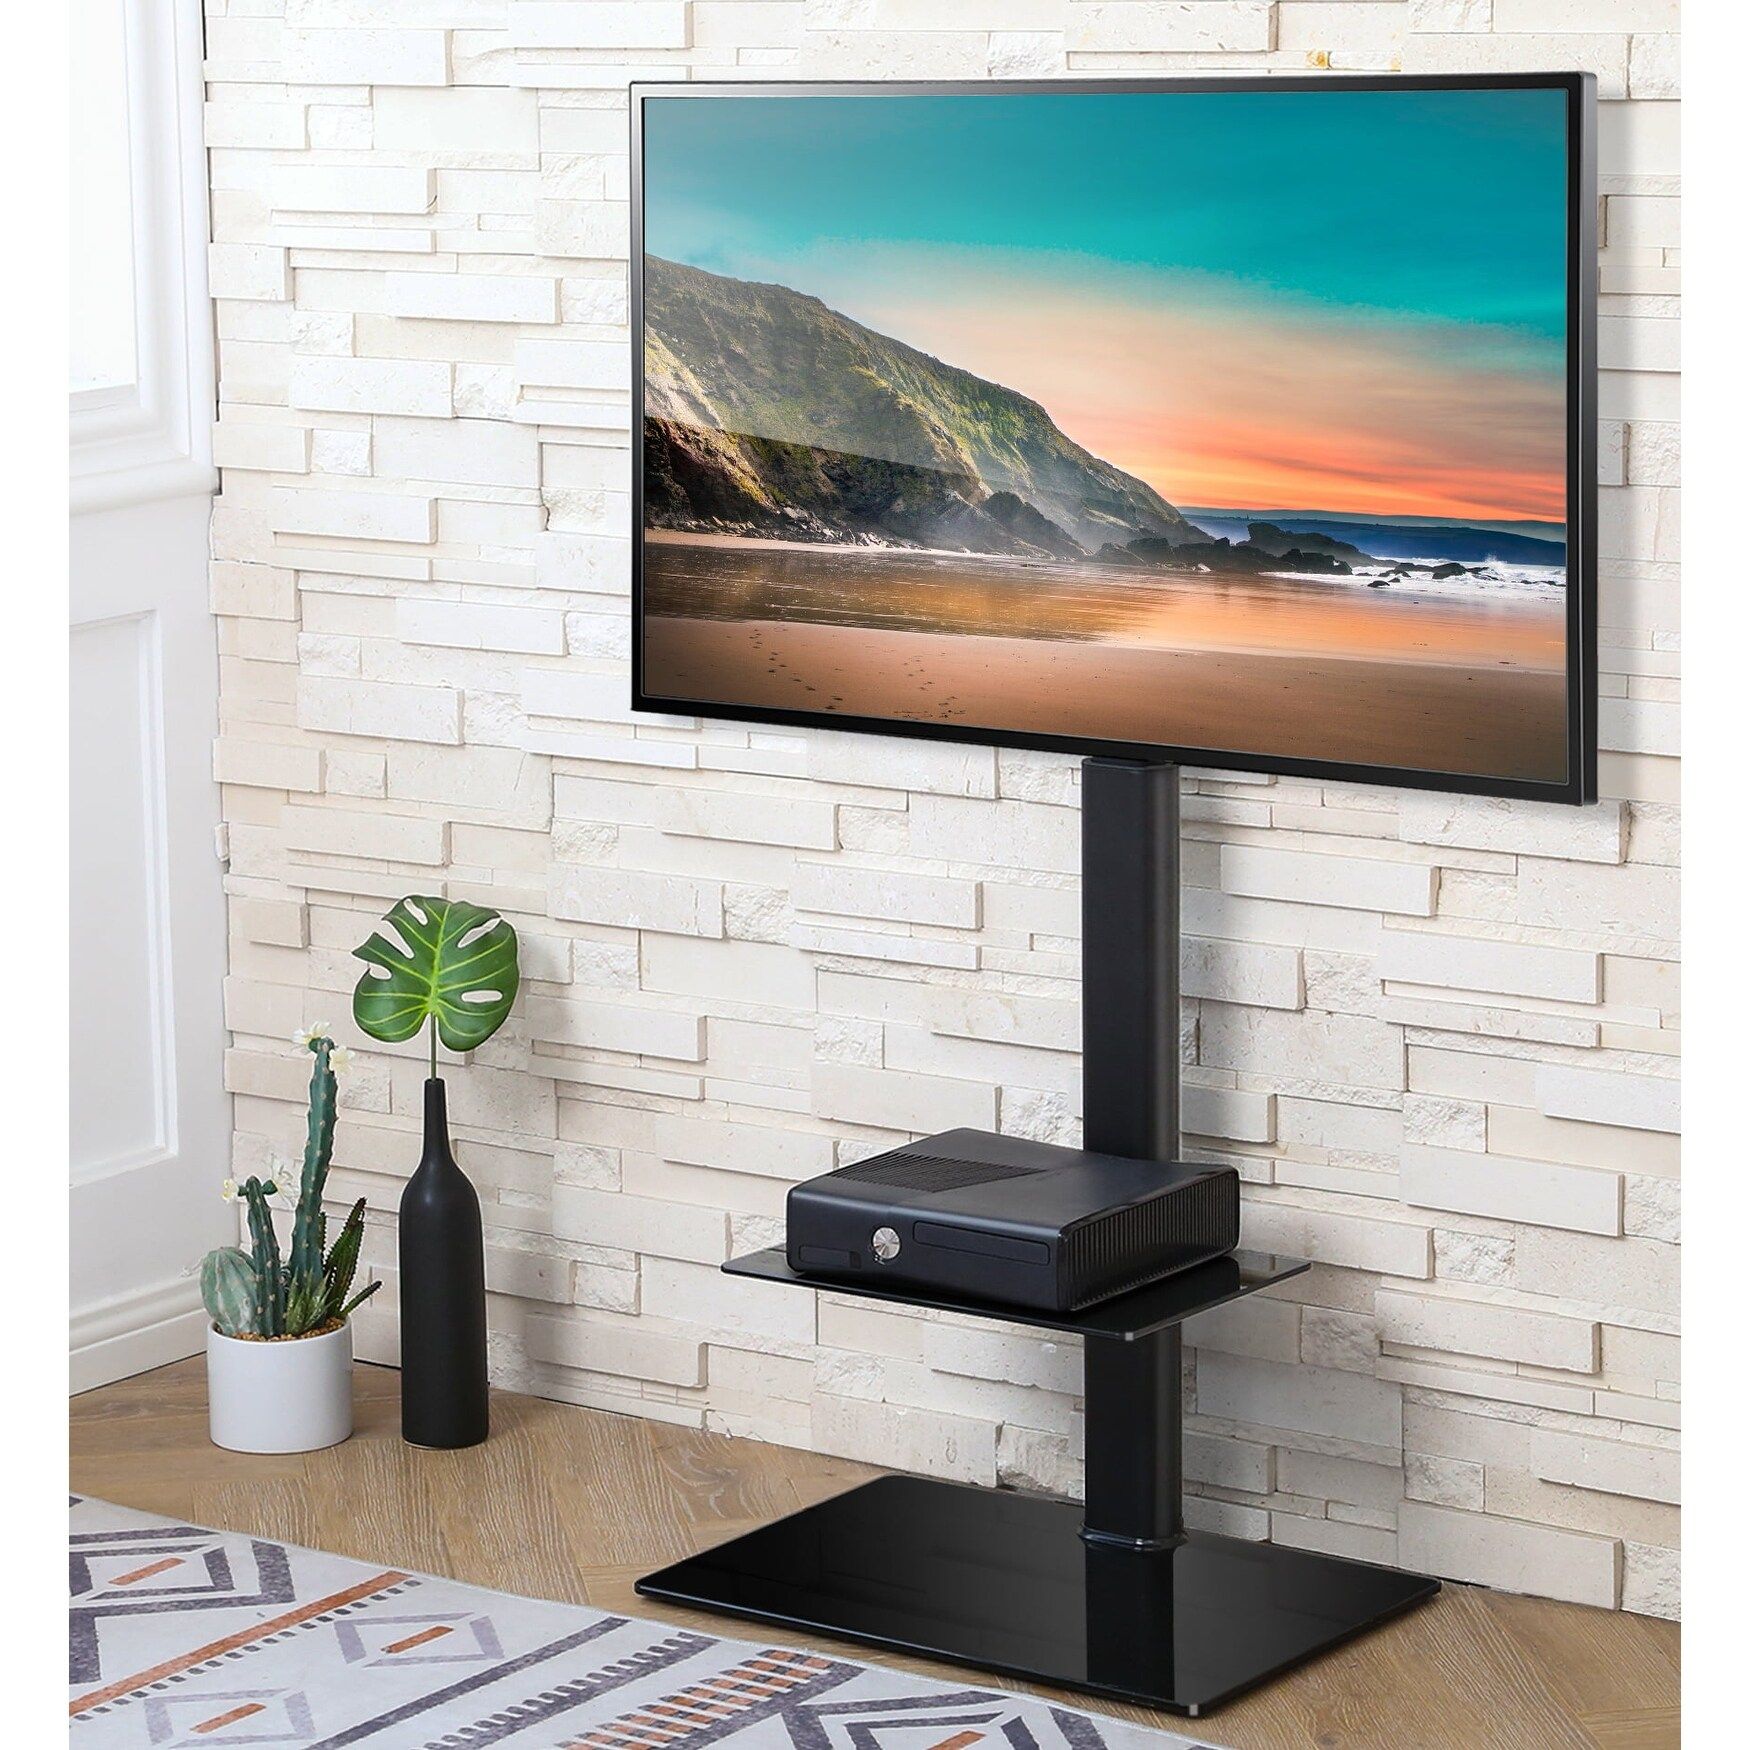 Modern Black Floor Tv Stand For Tvs Up To 60", Universal Swivel Mount – Bed  Bath & Beyond – 37250658 Intended For Universal Floor Tv Stands (View 7 of 15)